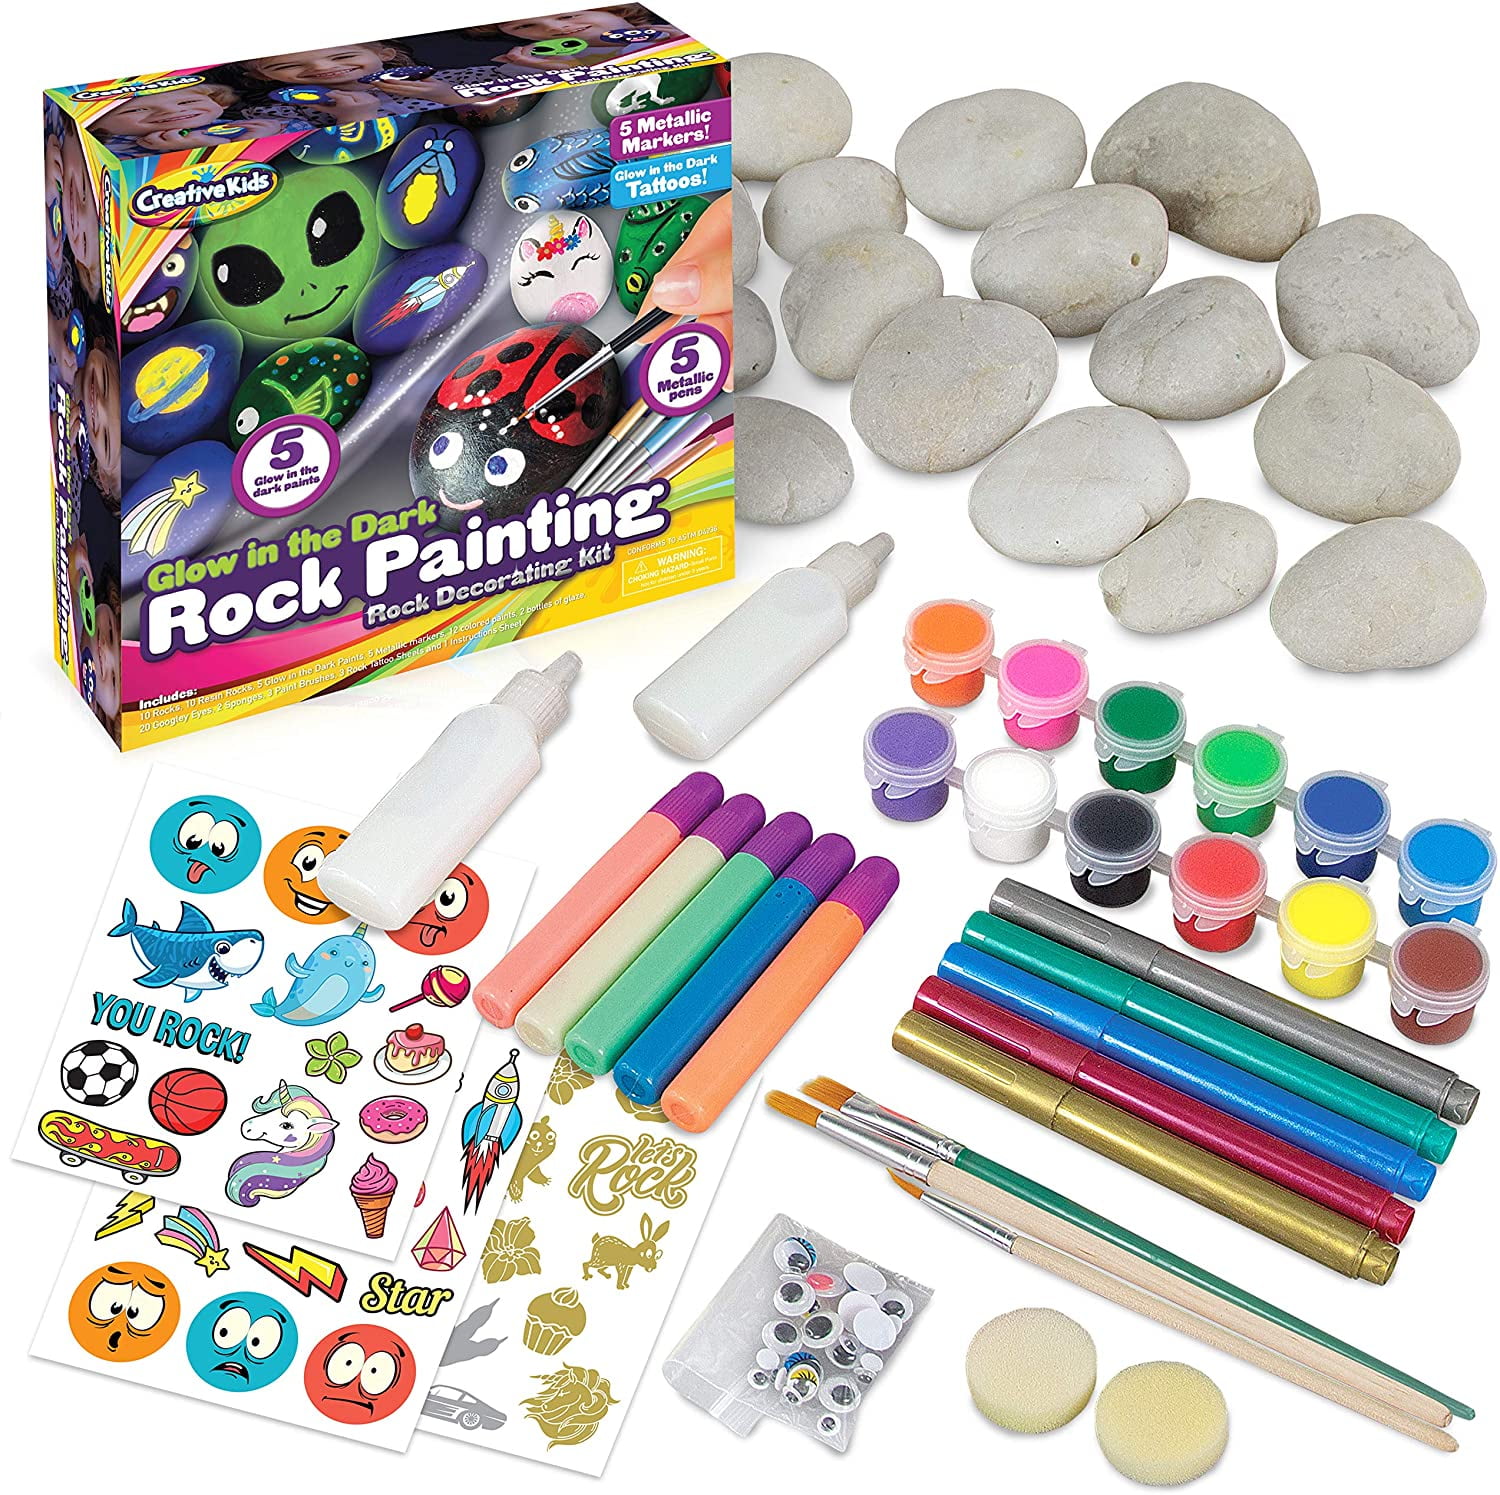 Rock Painting Kit for Kids - Arts and Crafts for Nepal